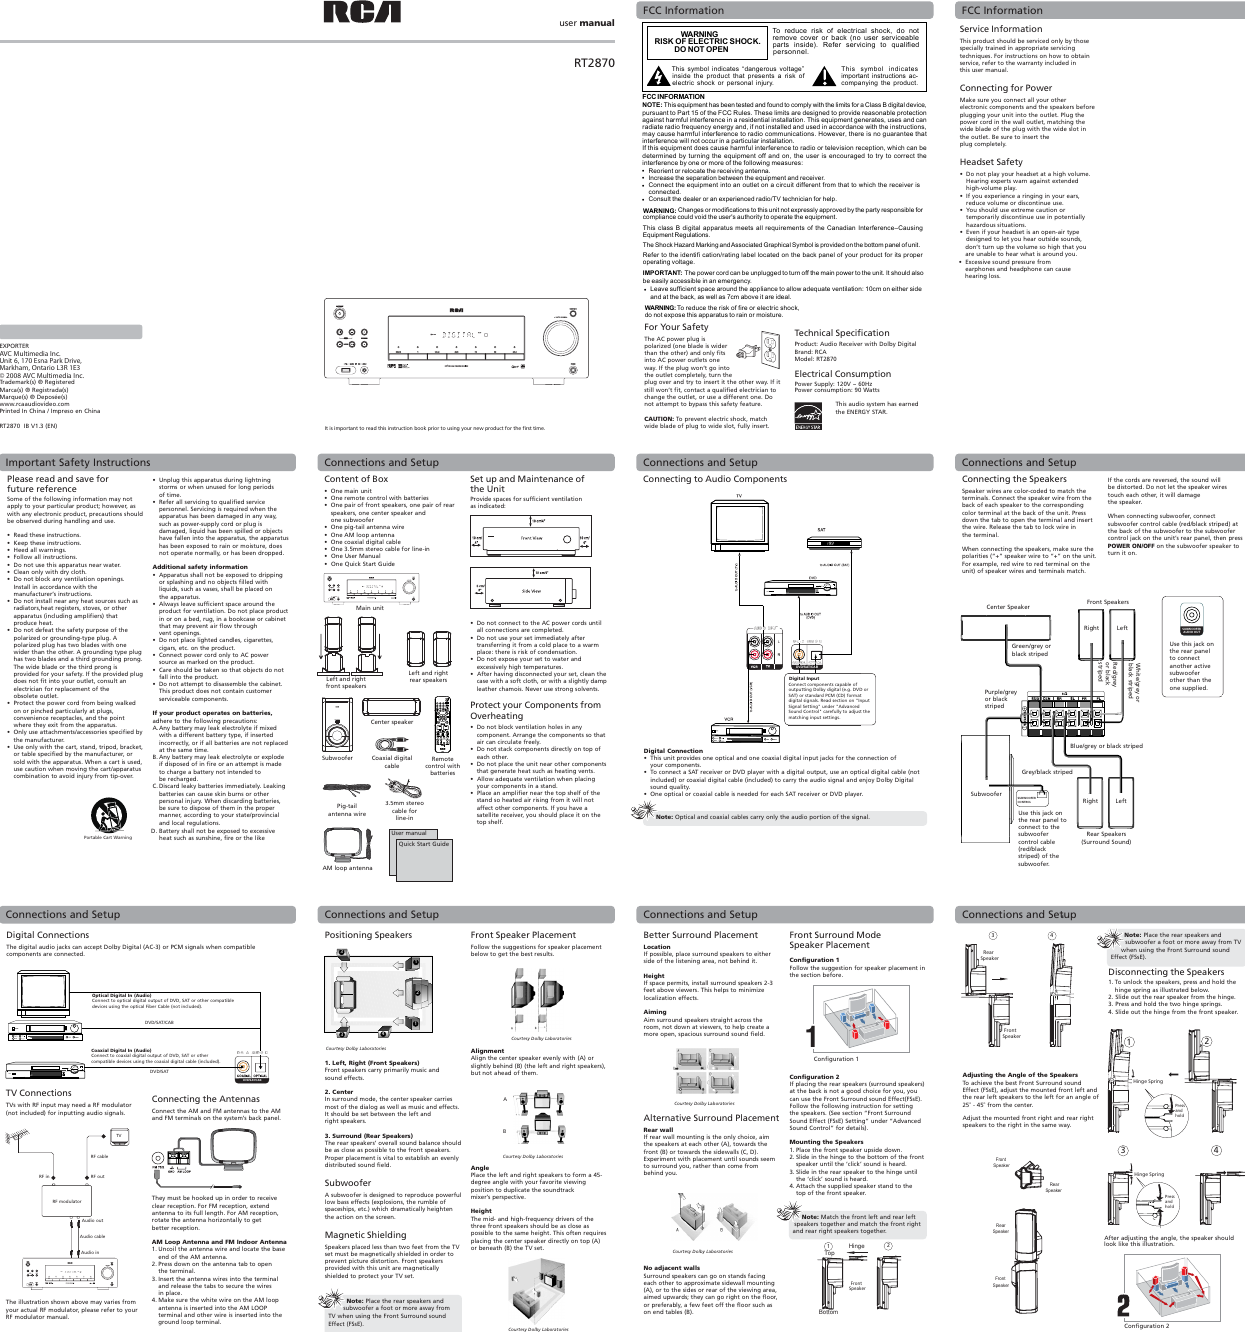 Rca Rt2870 Users Manual ManualsLib Makes It Easy To Find Manuals Online!